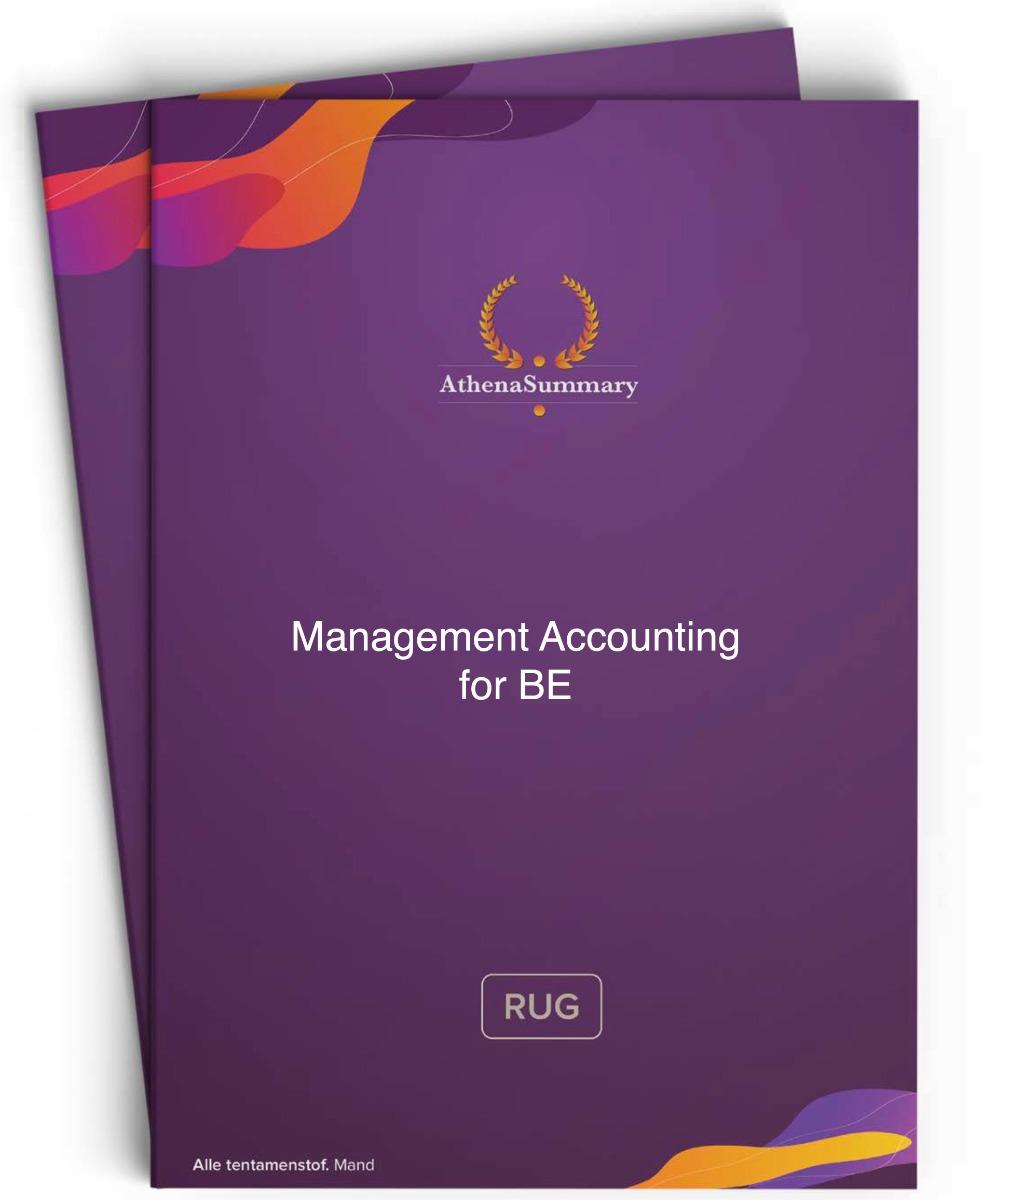 Literature Summary - Management Accounting for BE